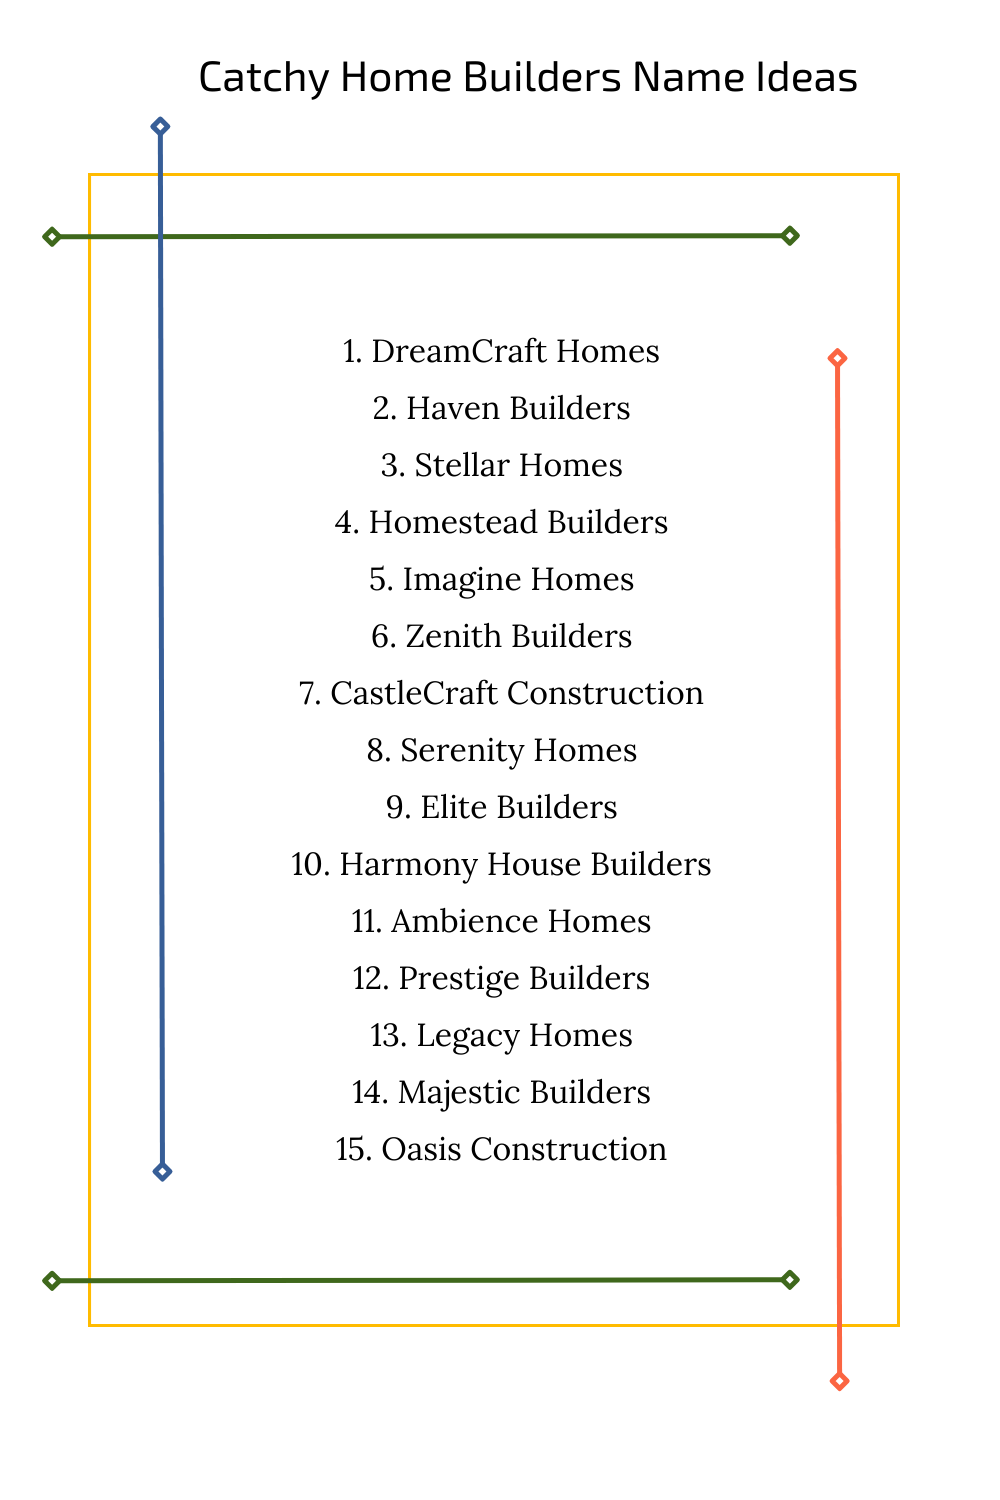 Catchy Home Builders Name Ideas